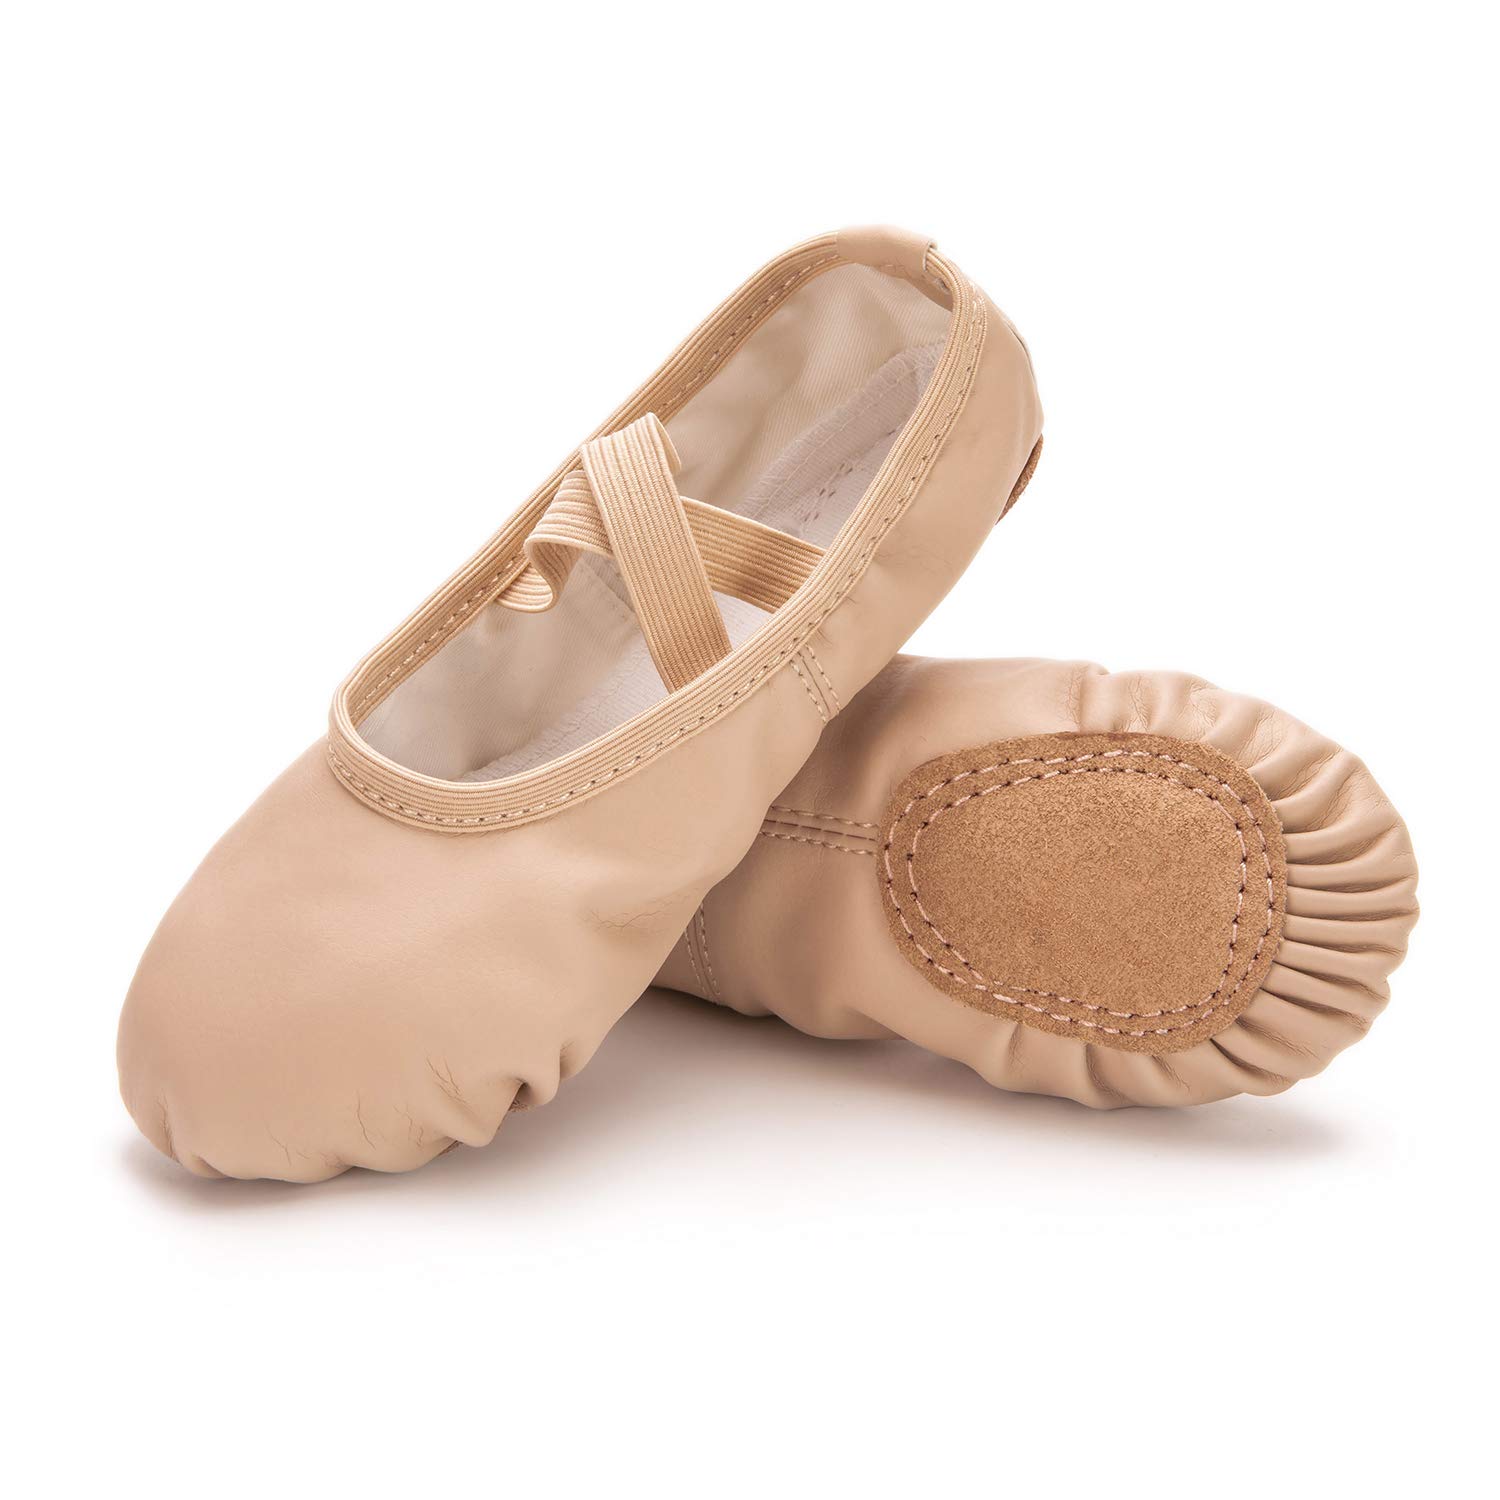 RoseMoli Ballet Shoes for Girls/Toddlers/Kids/Women, Leather Yoga Shoes/Ballet Slippers for Dancing